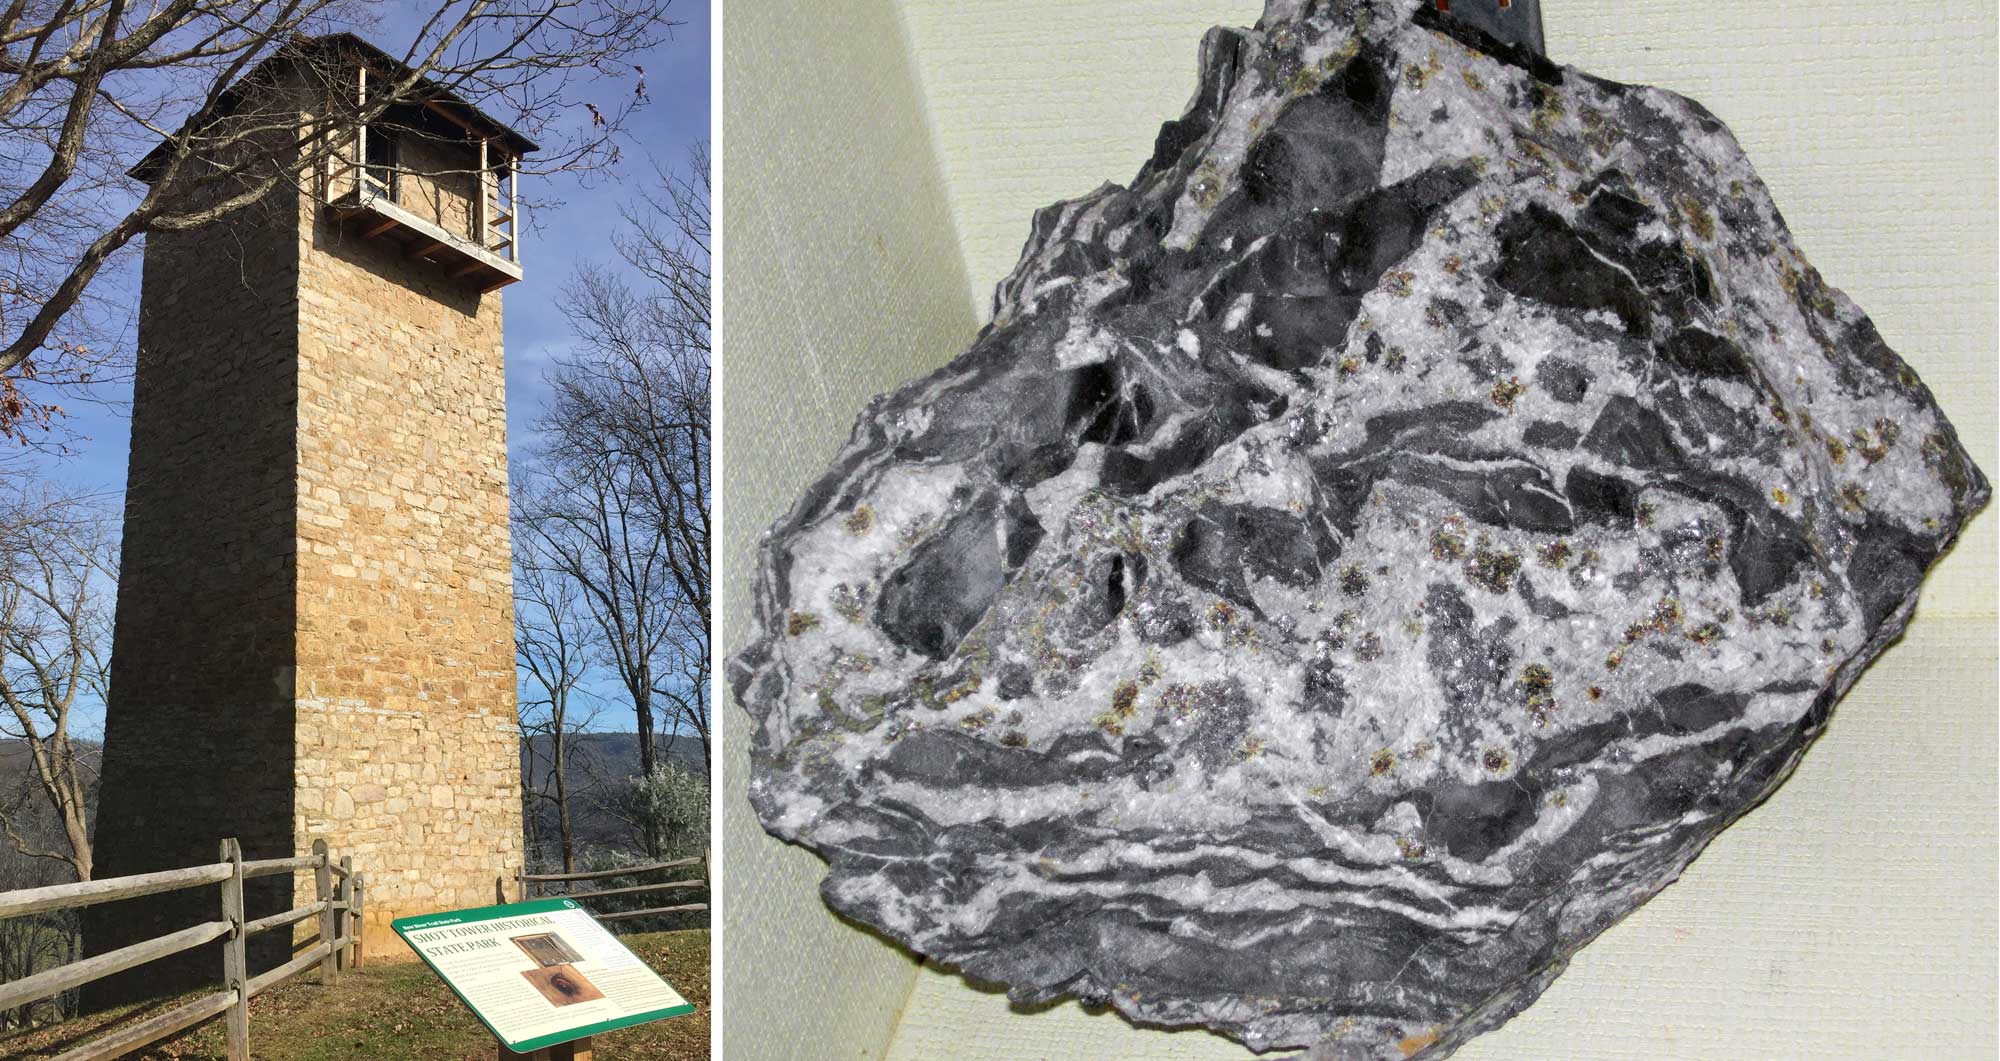 2-Panel image showing photographs. Panel 1: Stone tower used to make lead shot, built in 1807. Panel 2: Chunk or ore containing lead and zinc.